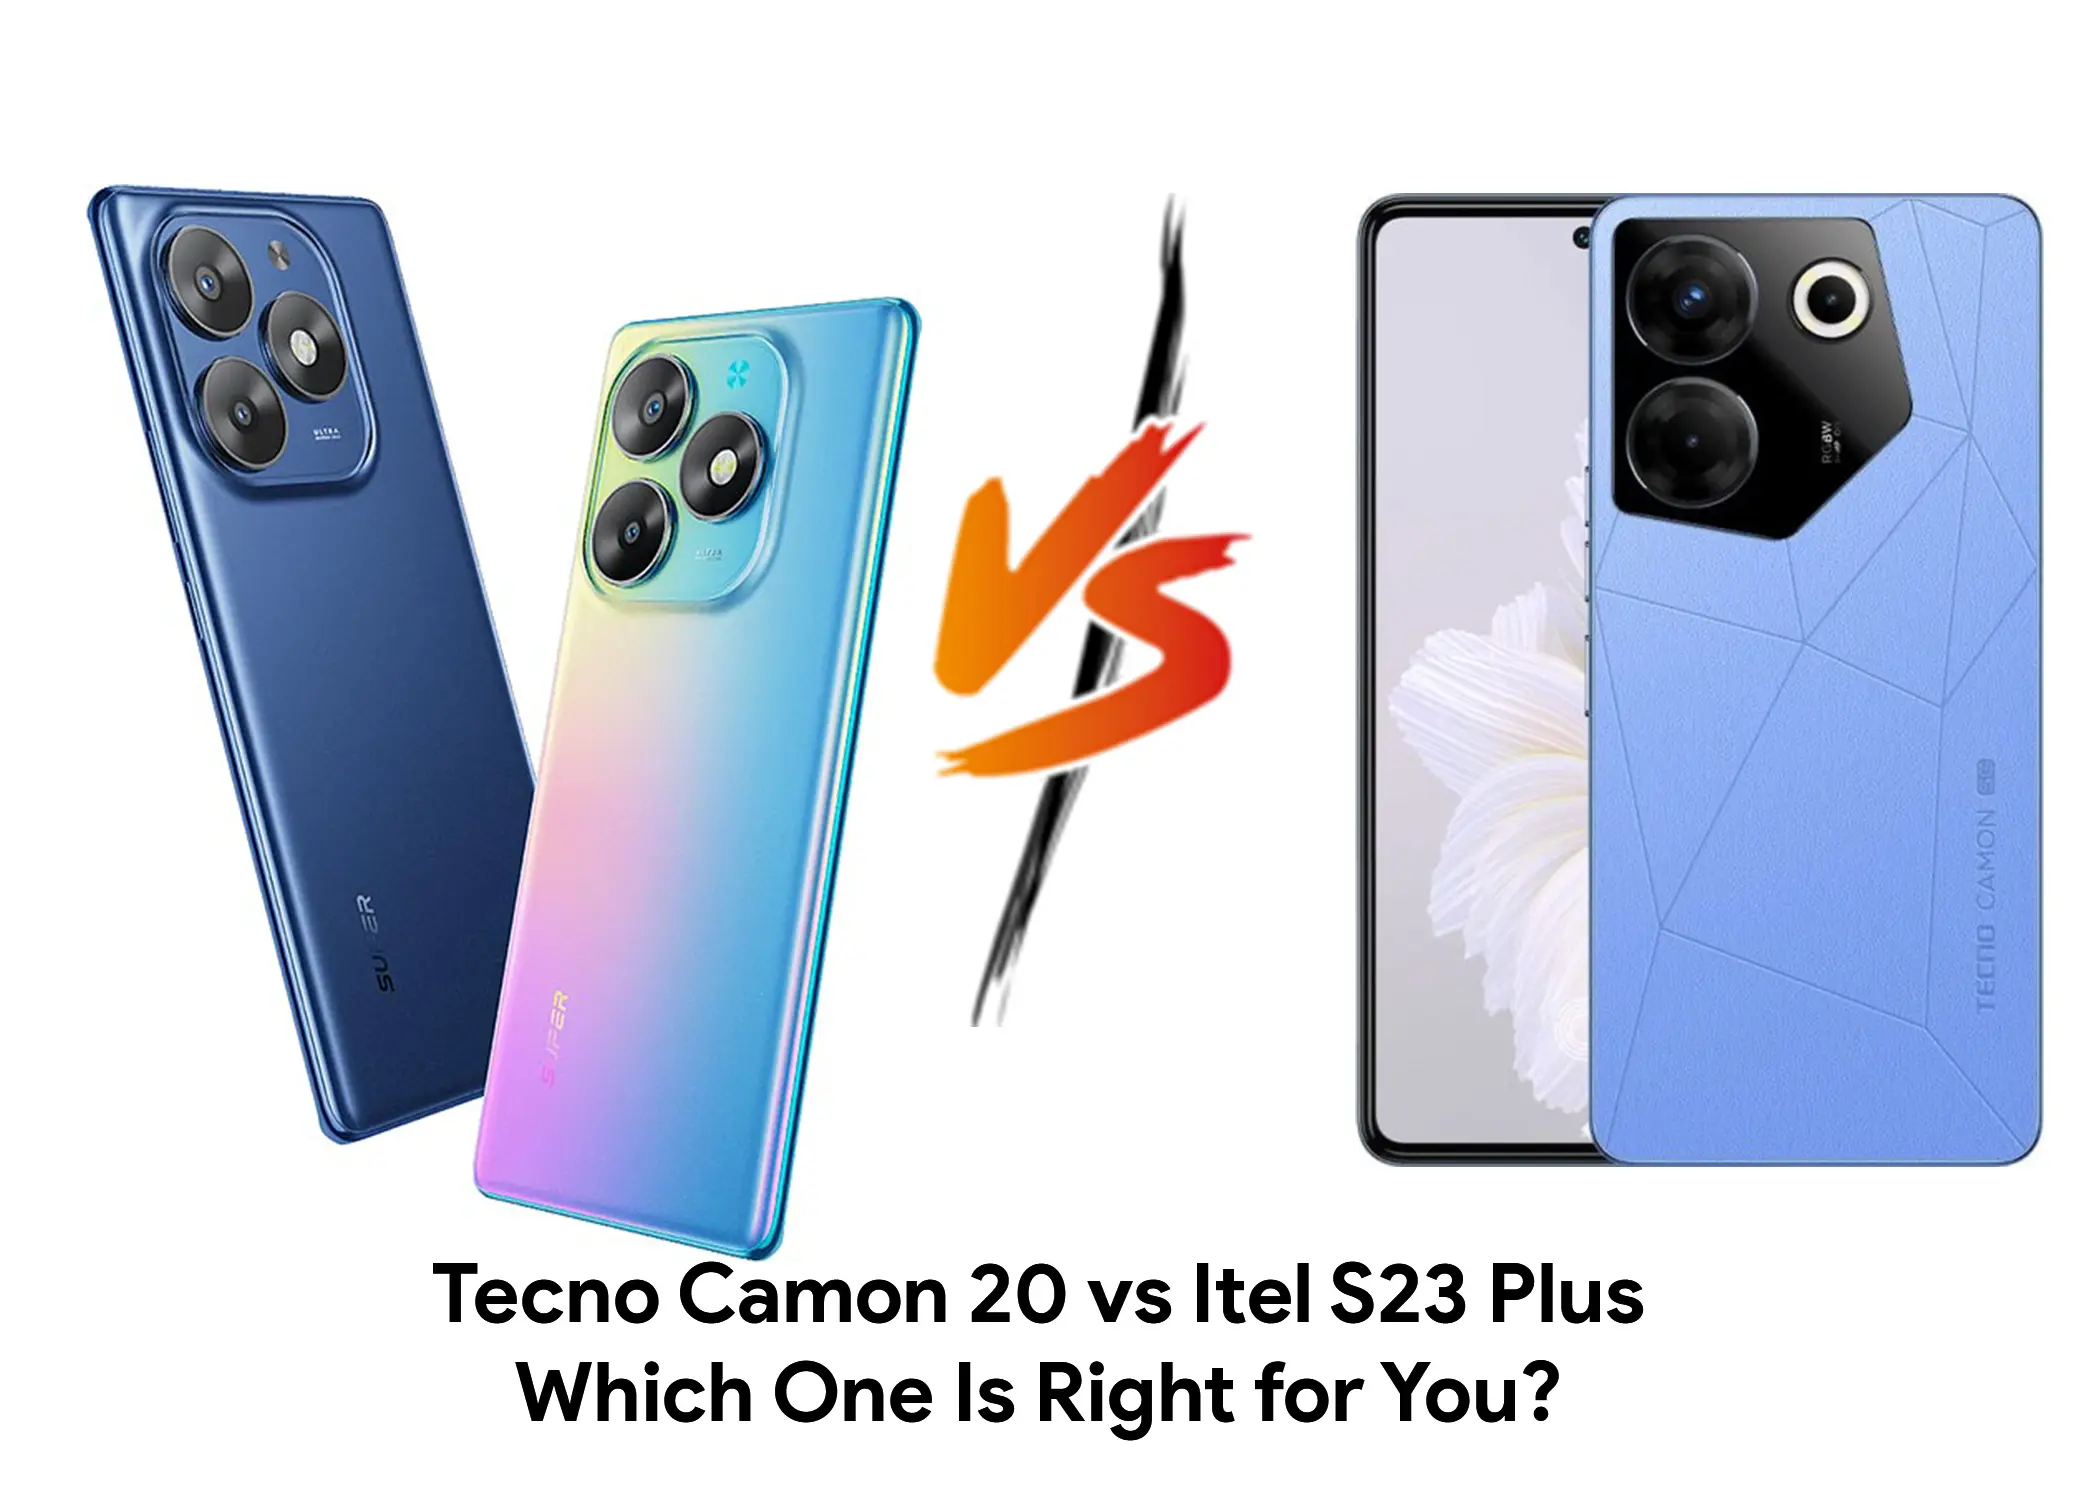 Tecno Camon 20 vs Itel S23 Plus: Which One Is Right for You?